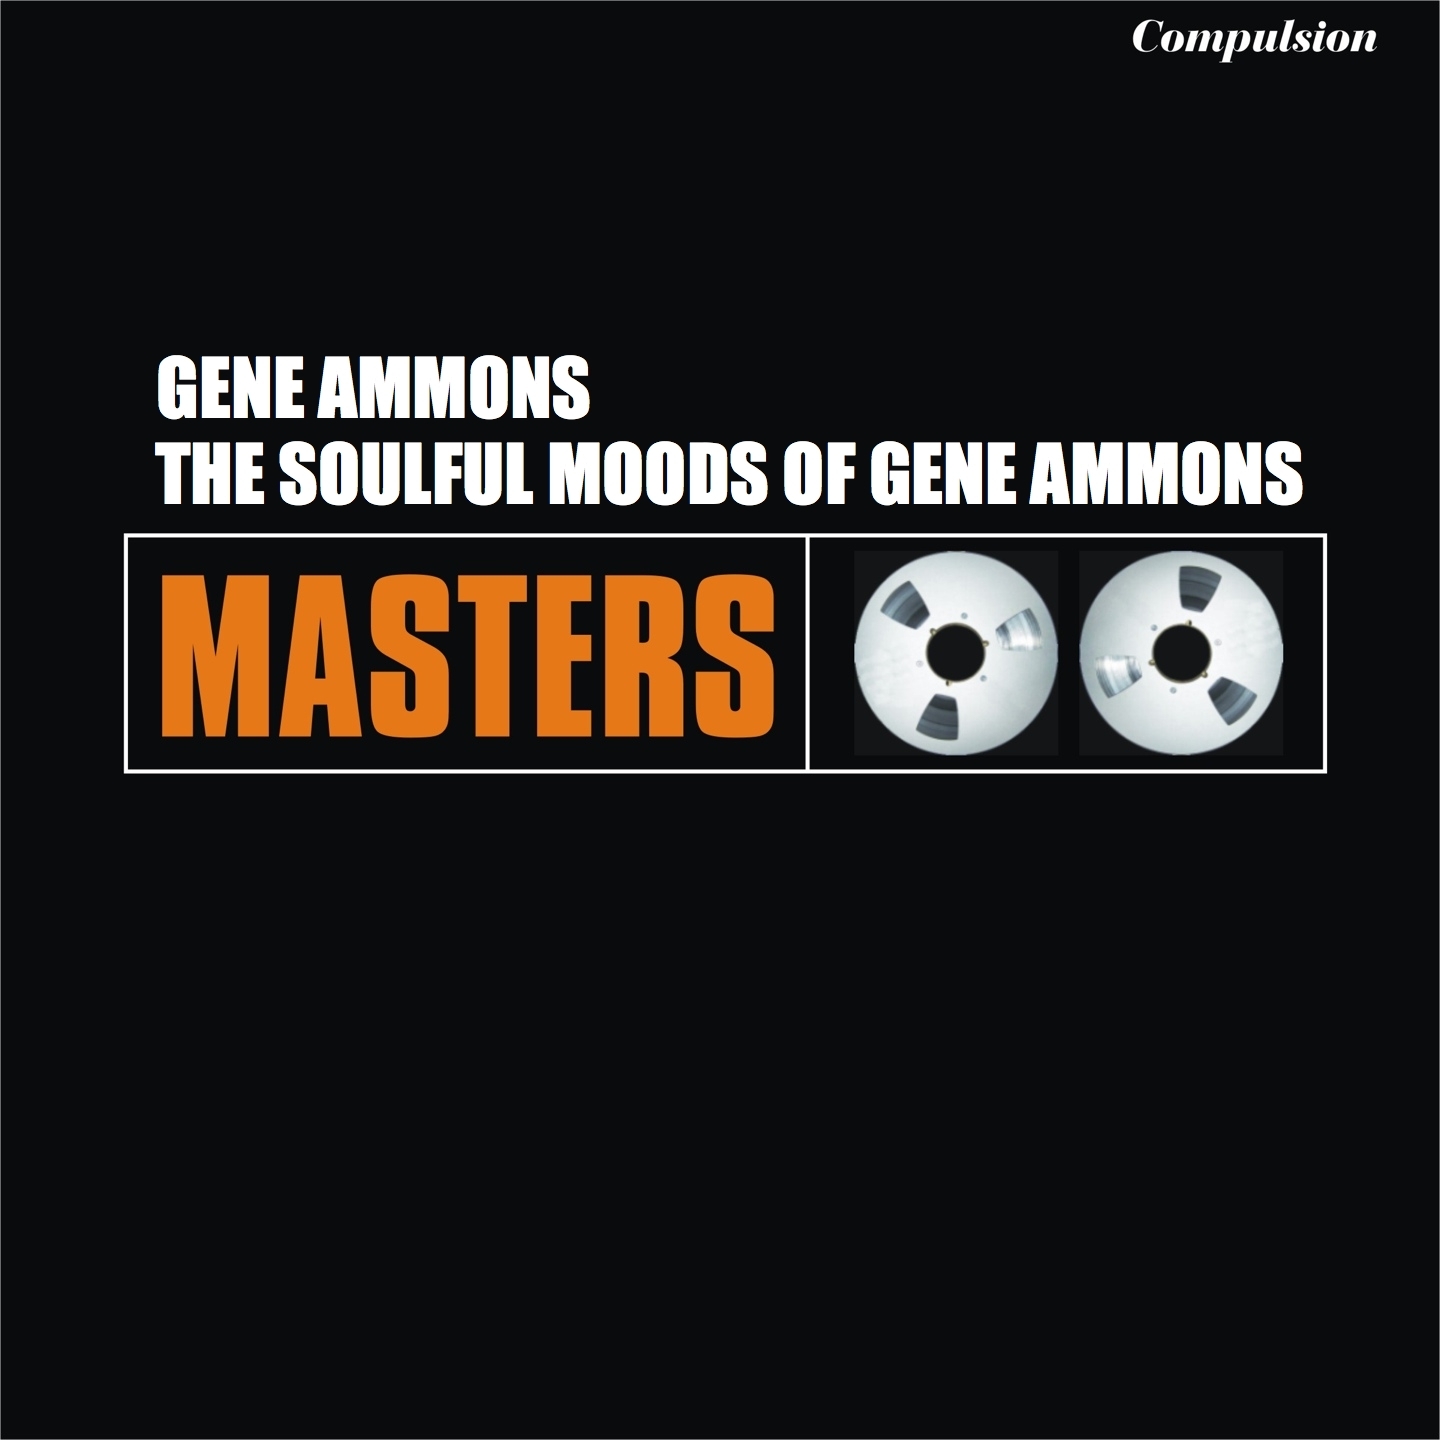 The Soulful Moods of Gene Ammons